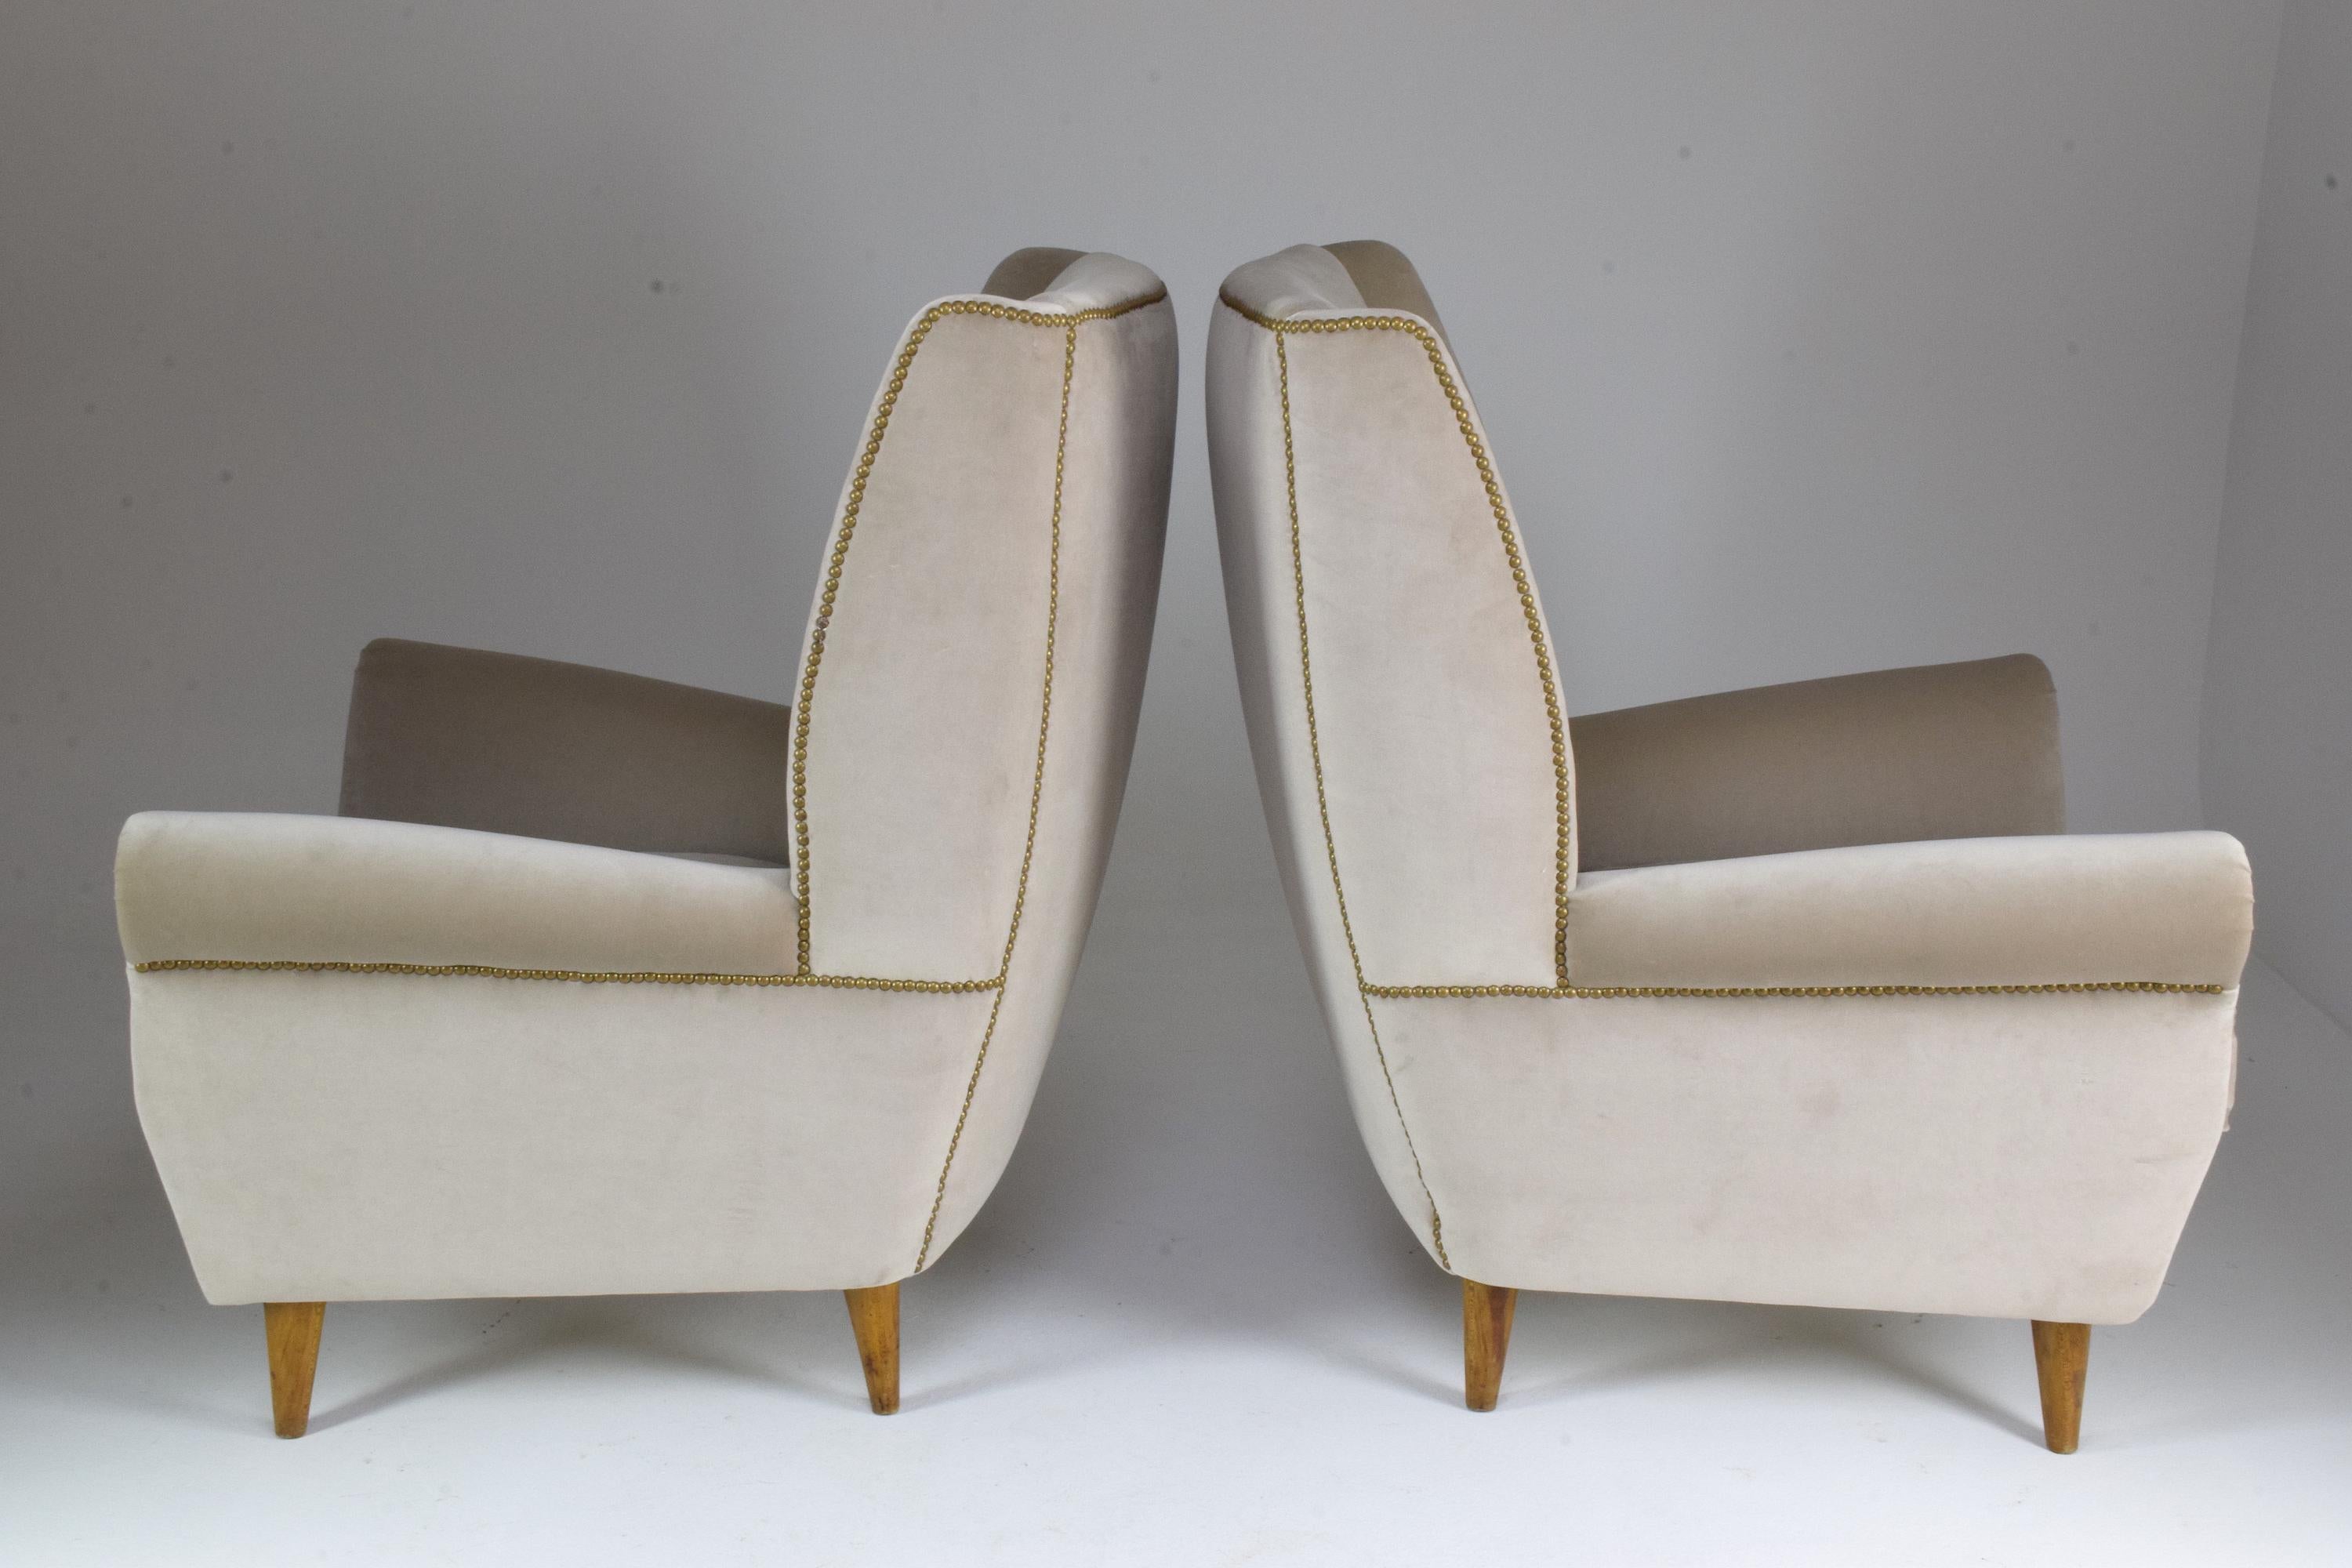 Pair of 20th Century Armchairs In the Style of Gio Ponti, 1940s For Sale 10